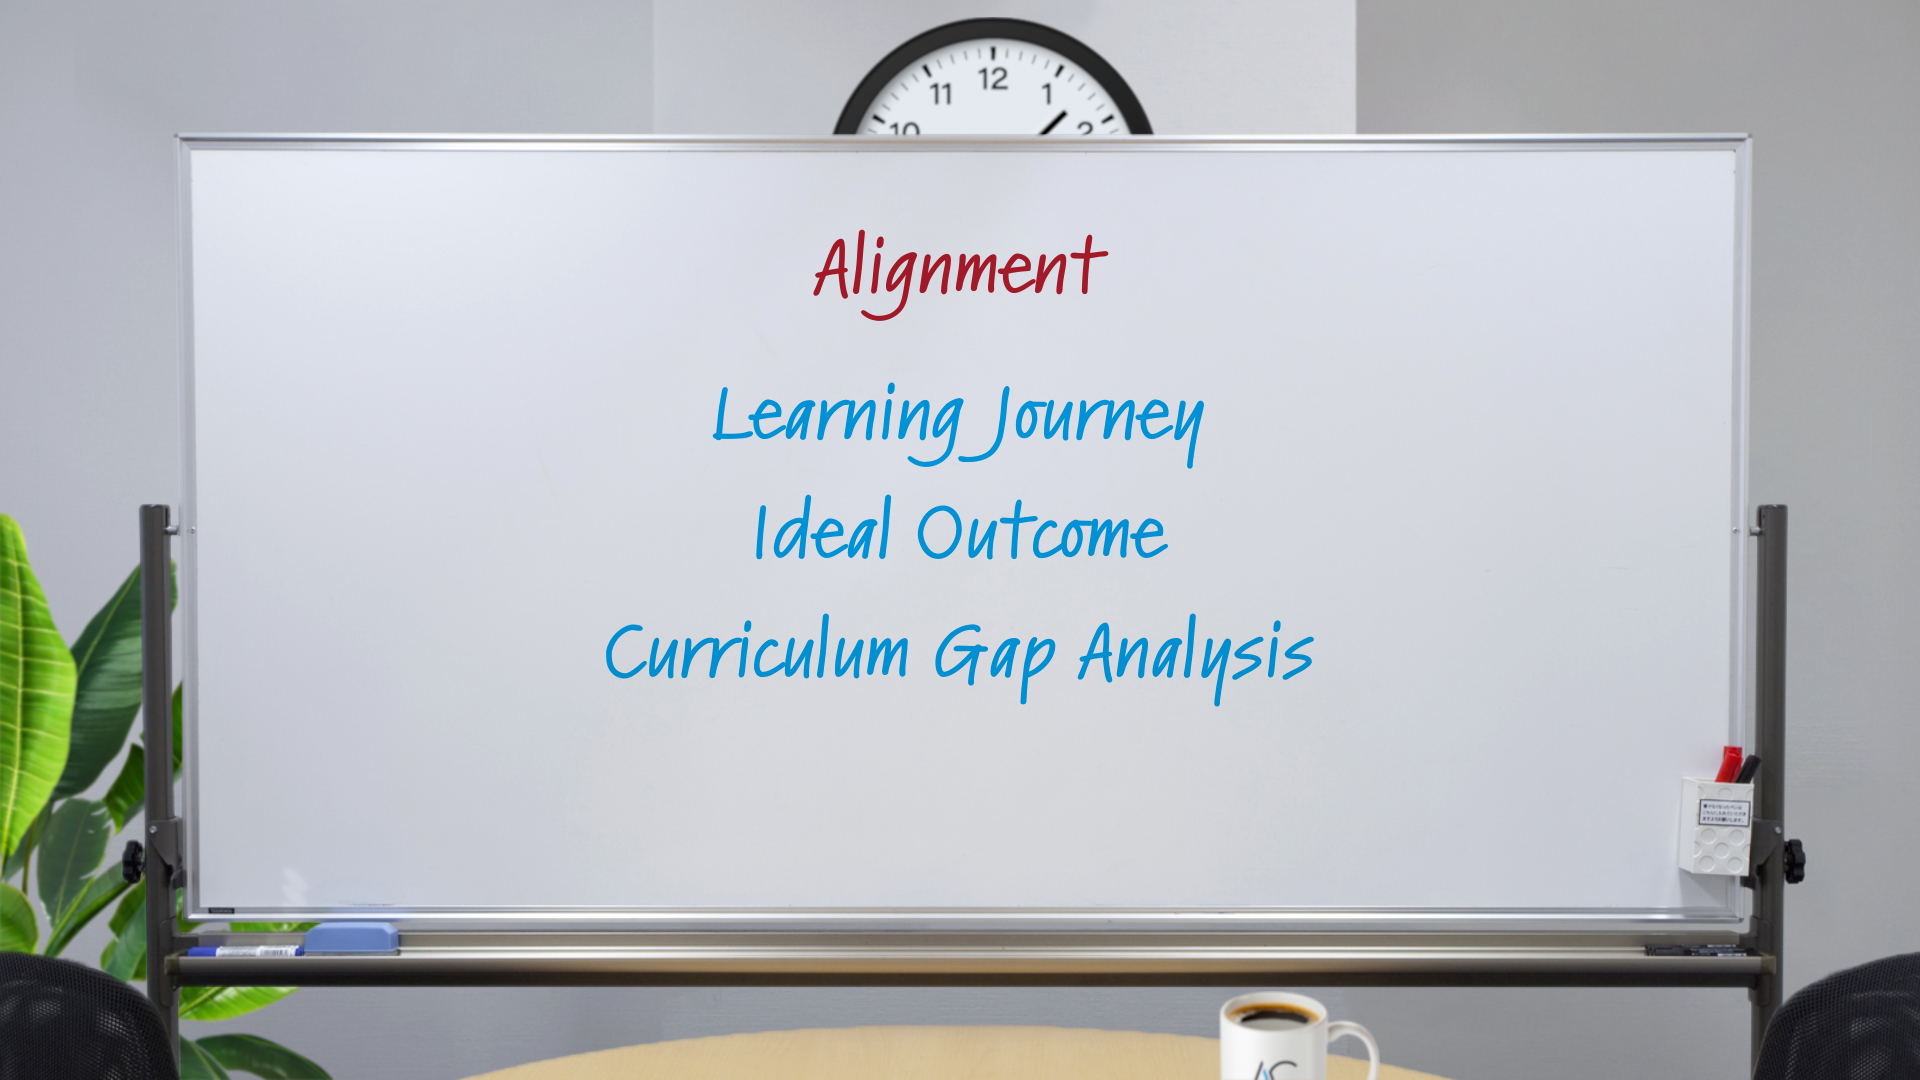 Whiteboard, in an office setting with a clock, conference table, steaming coffee mug, and plants, with the word "Alignment" written on it in red marker and "Learning Journey", "Ideal Outcome", "Curriculum Gap Analysis" in blue